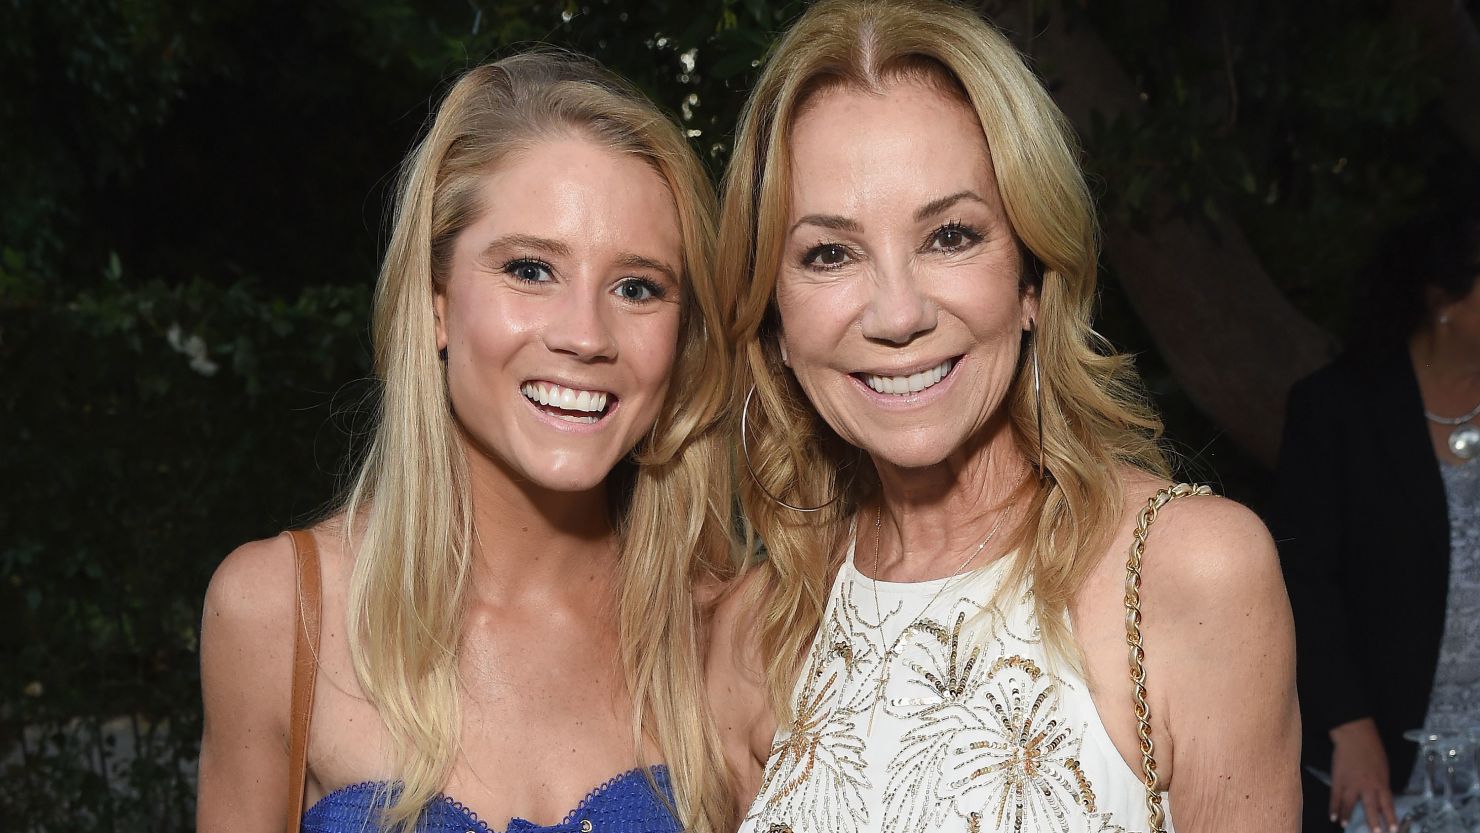  Cassidy Gifford and Kathie Lee Gifford arrive at The COTA Awards (Celebration of the Arts) on September 15, 2018 in Malibu, California. 